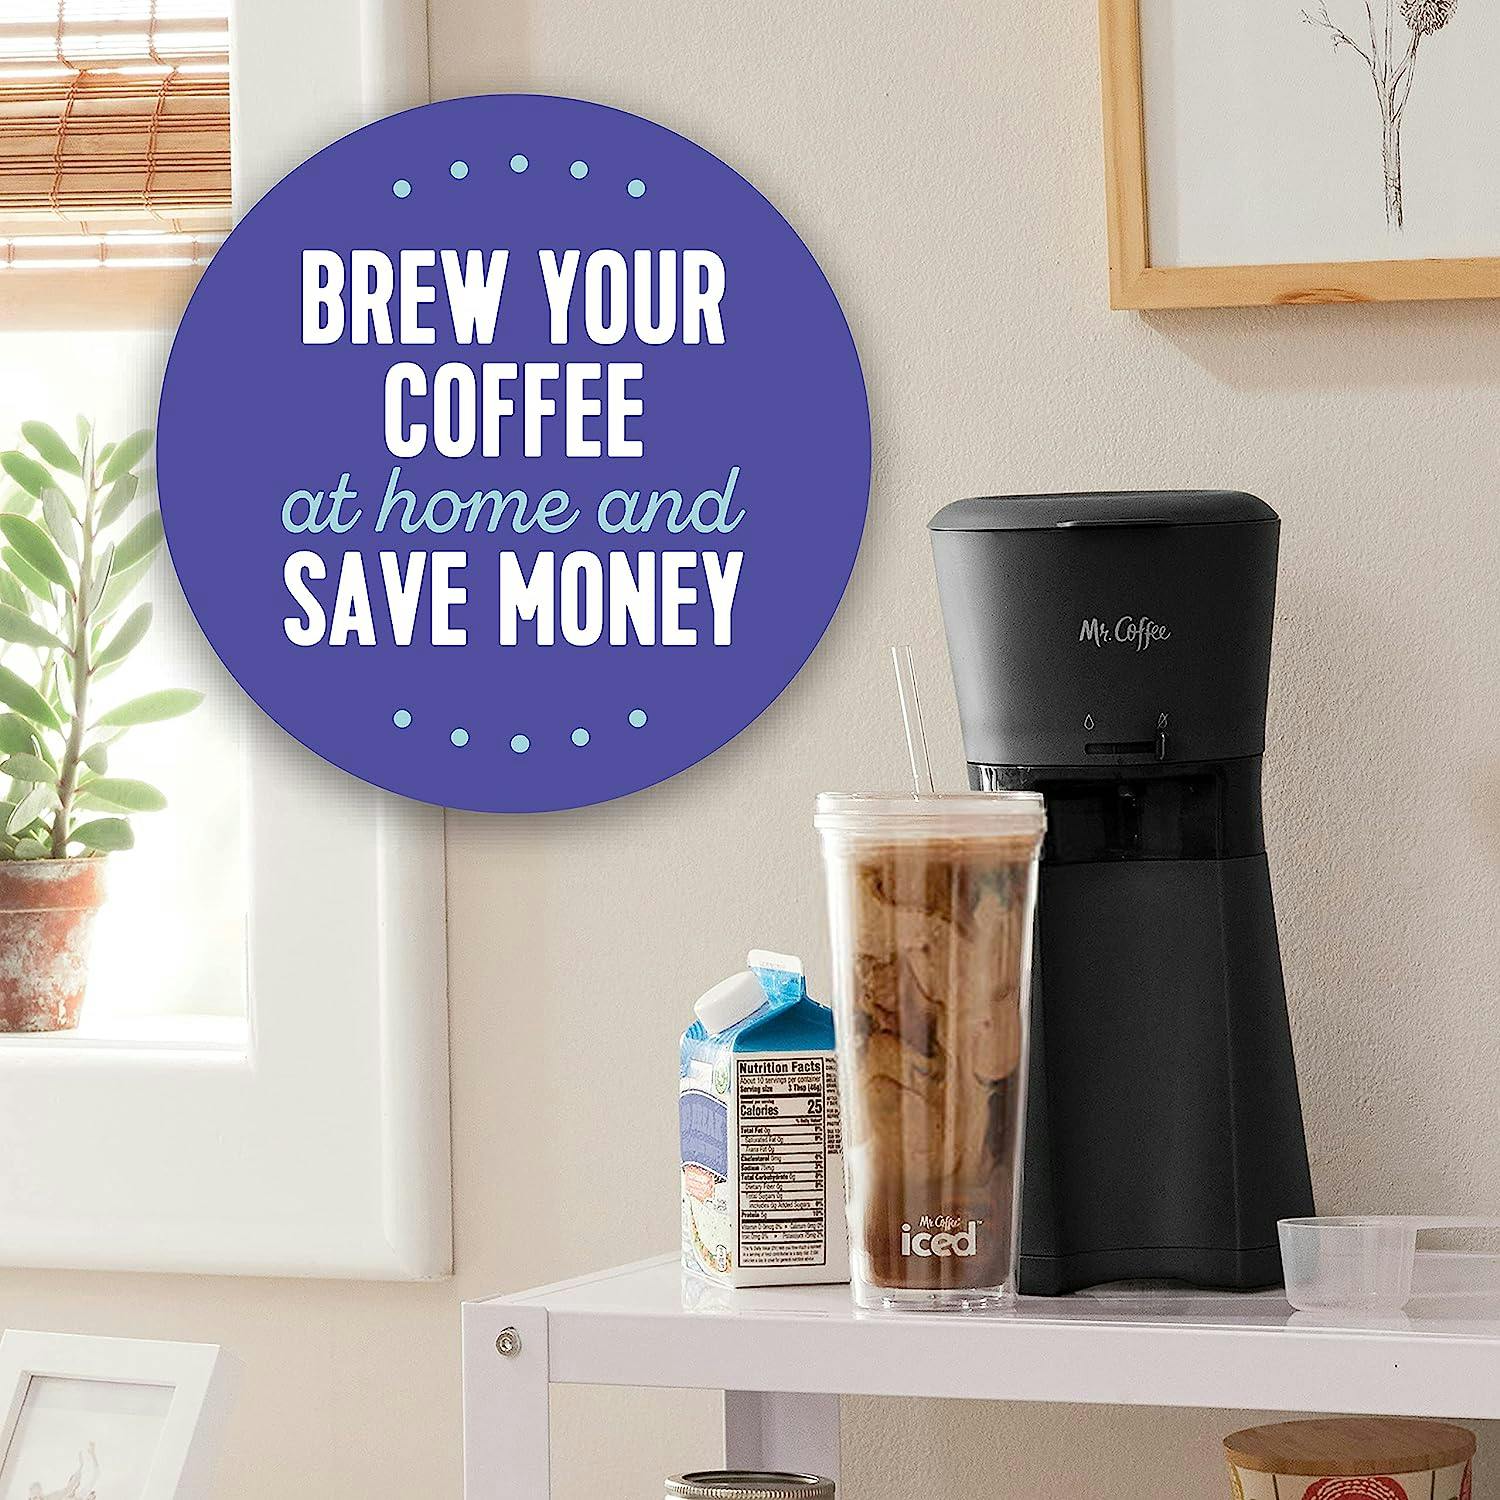 Sleek Black Programmable Iced Coffee Maker with Reusable Filter